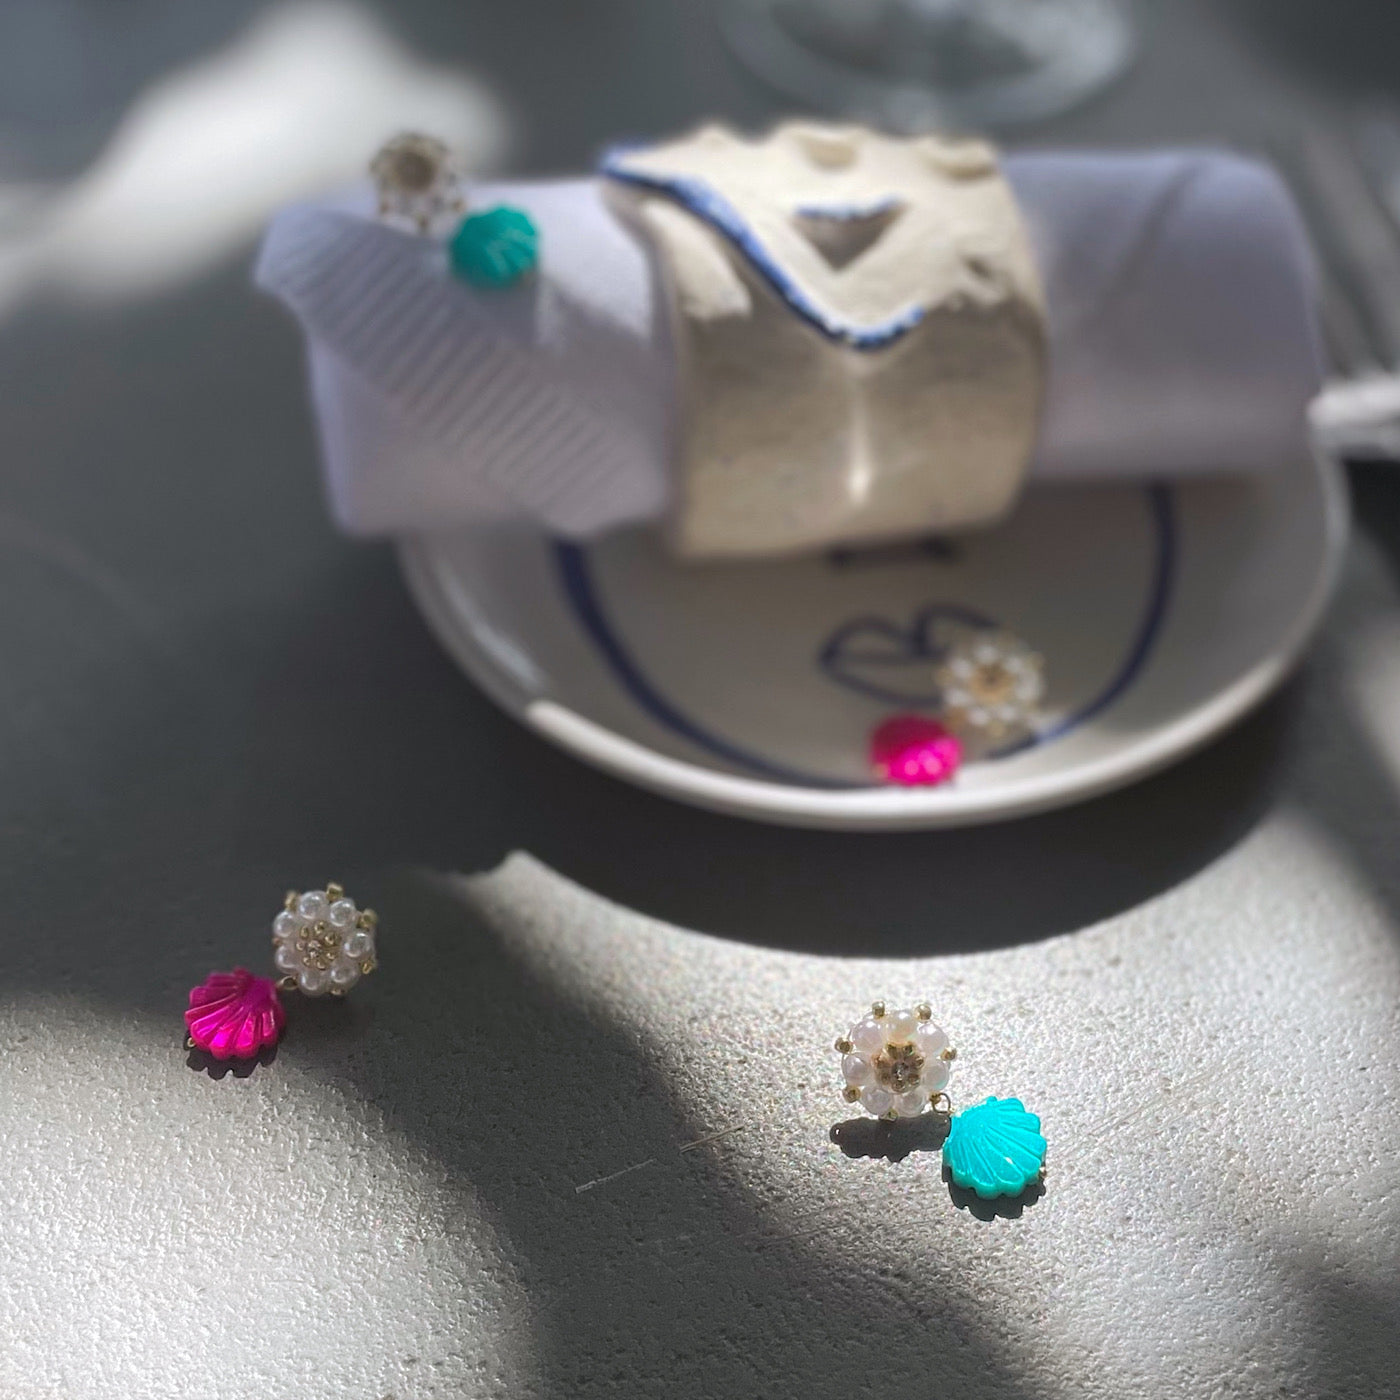 colourful summer shell earrings with natural pearls and mother of pearl shell charms in turquoise and pink